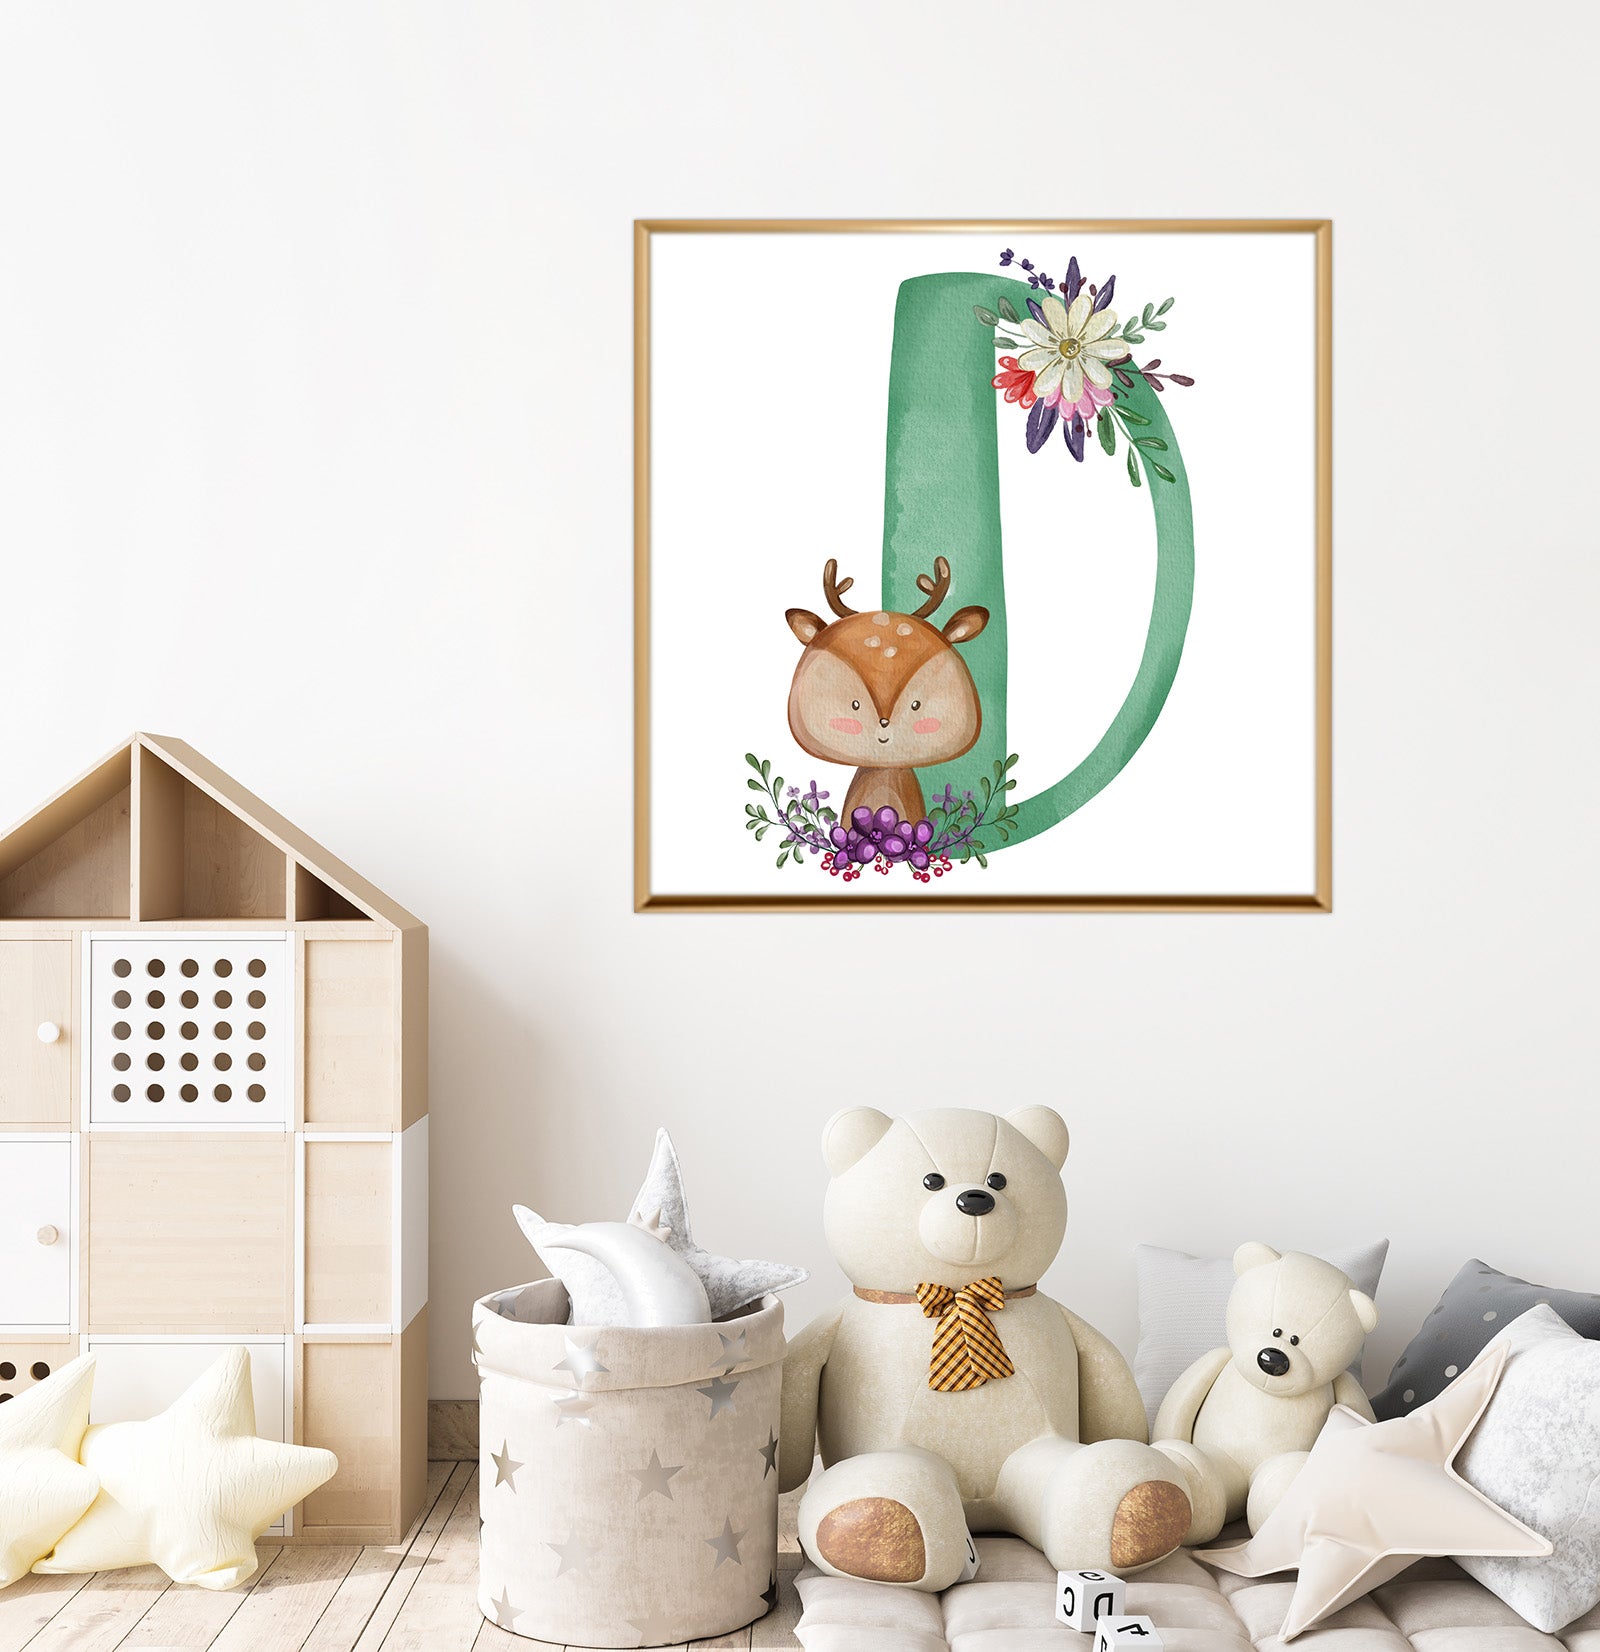 Wall Painting For Kid's Room (Letter D)